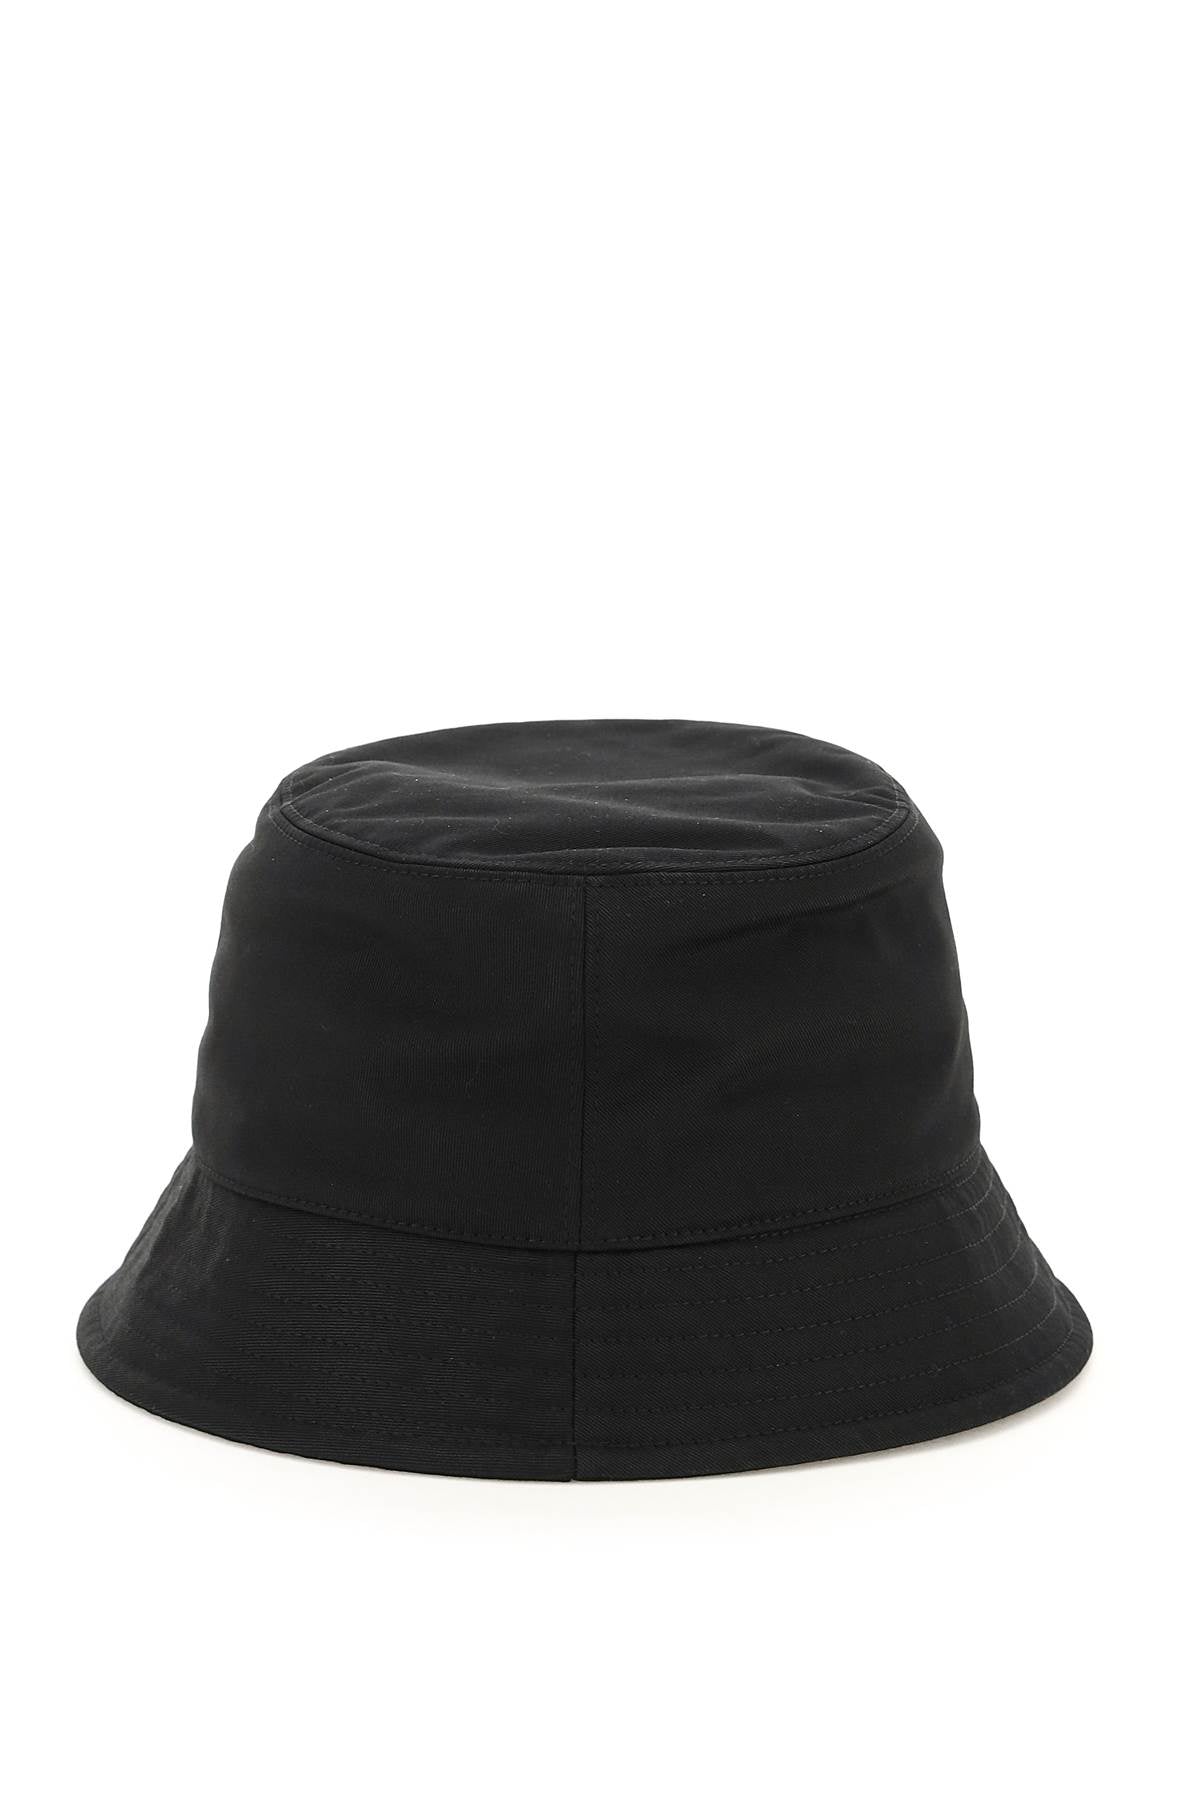 Dsquared2 'icon' bucket hat-2